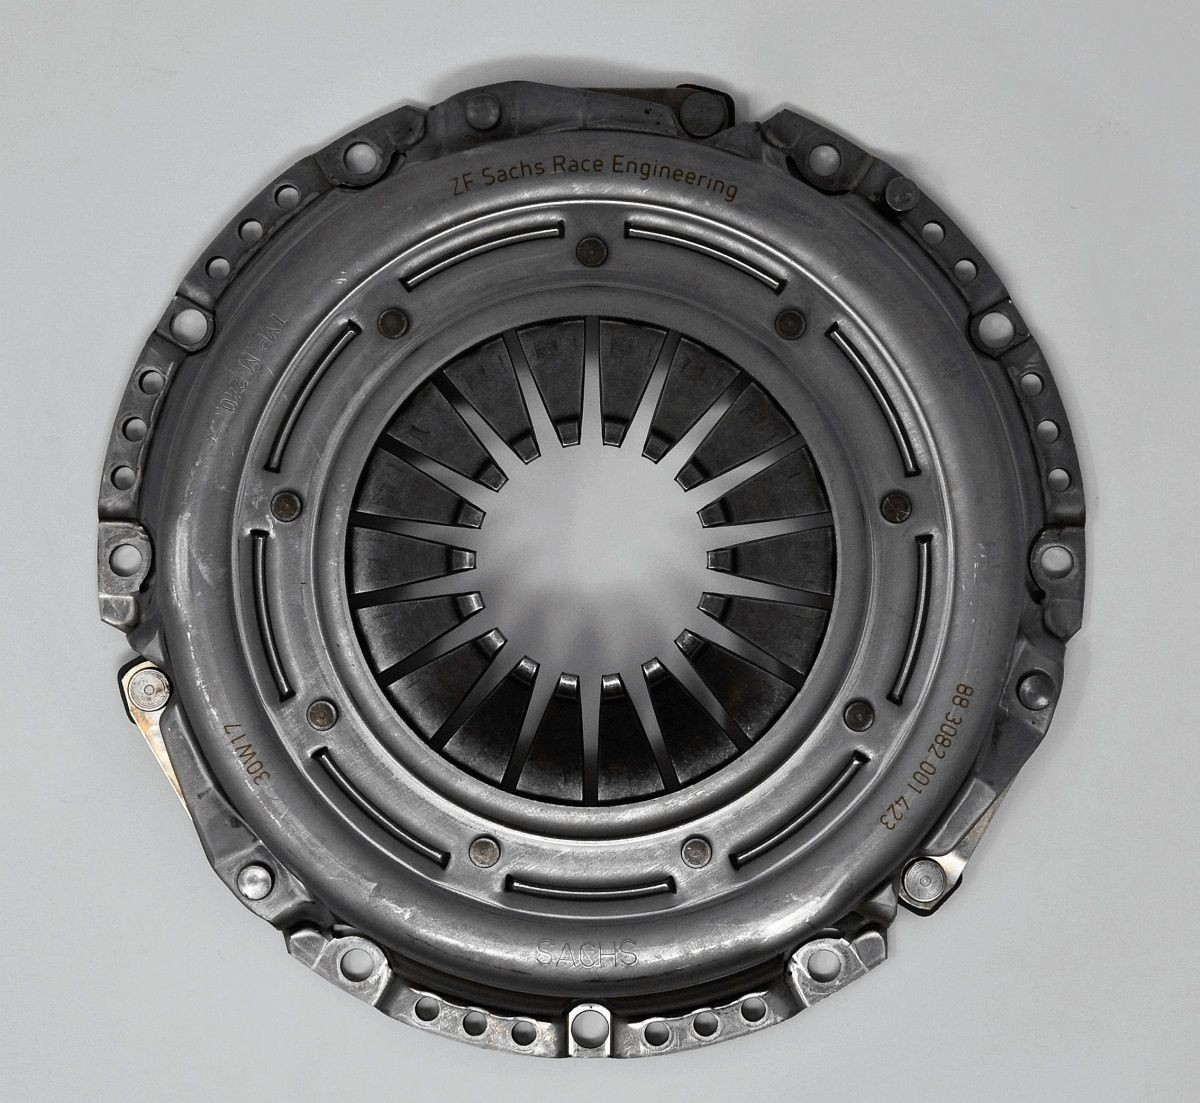 Volkswagen Clutch Pressure Plate SACHS PERFORMANCE 883082 001423 at a good price